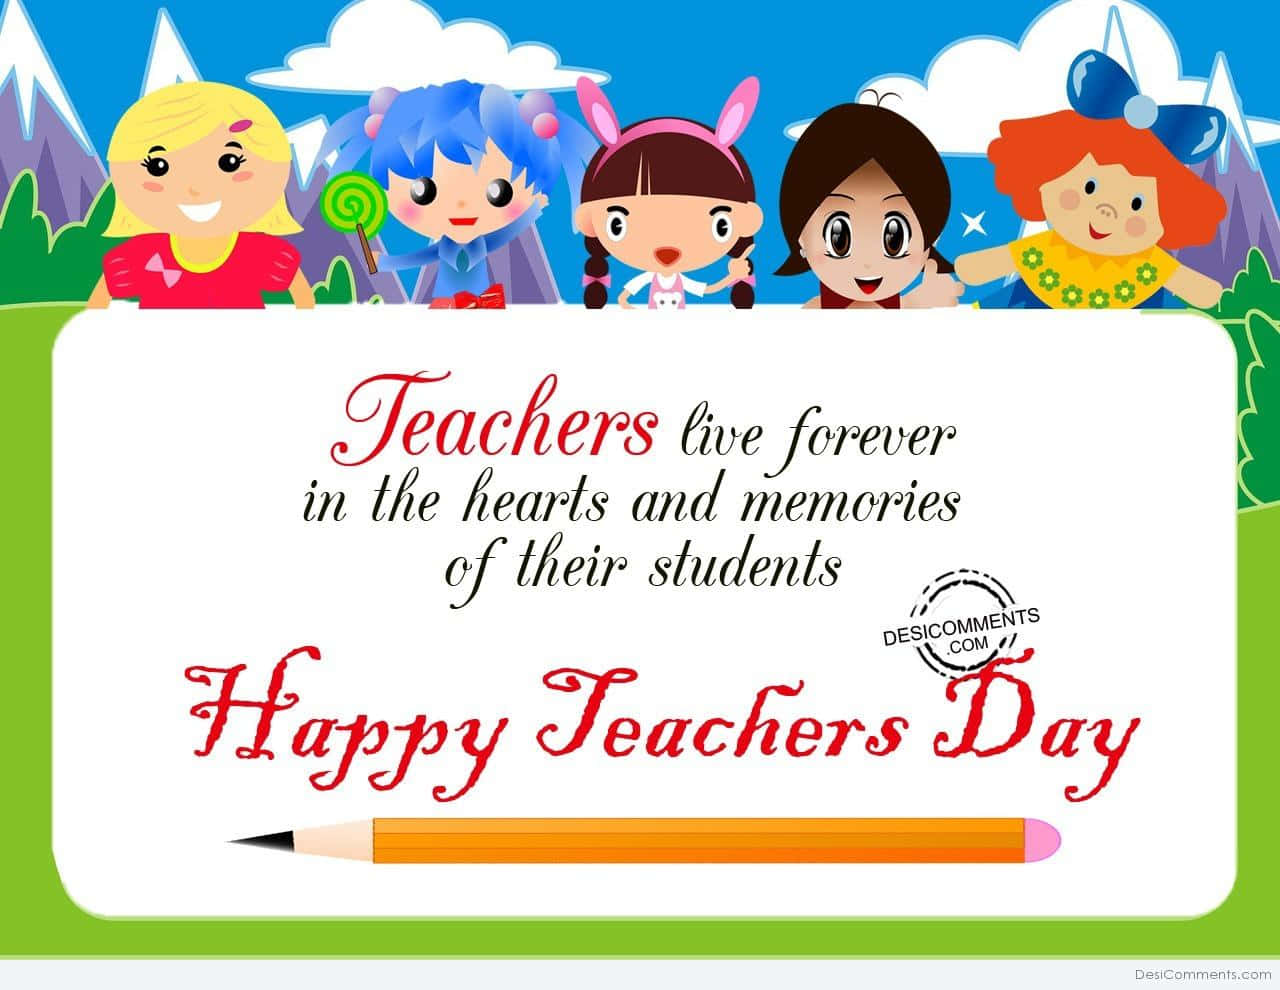 "Let’s celebrate our teachers and thank them for their dedication and service!"